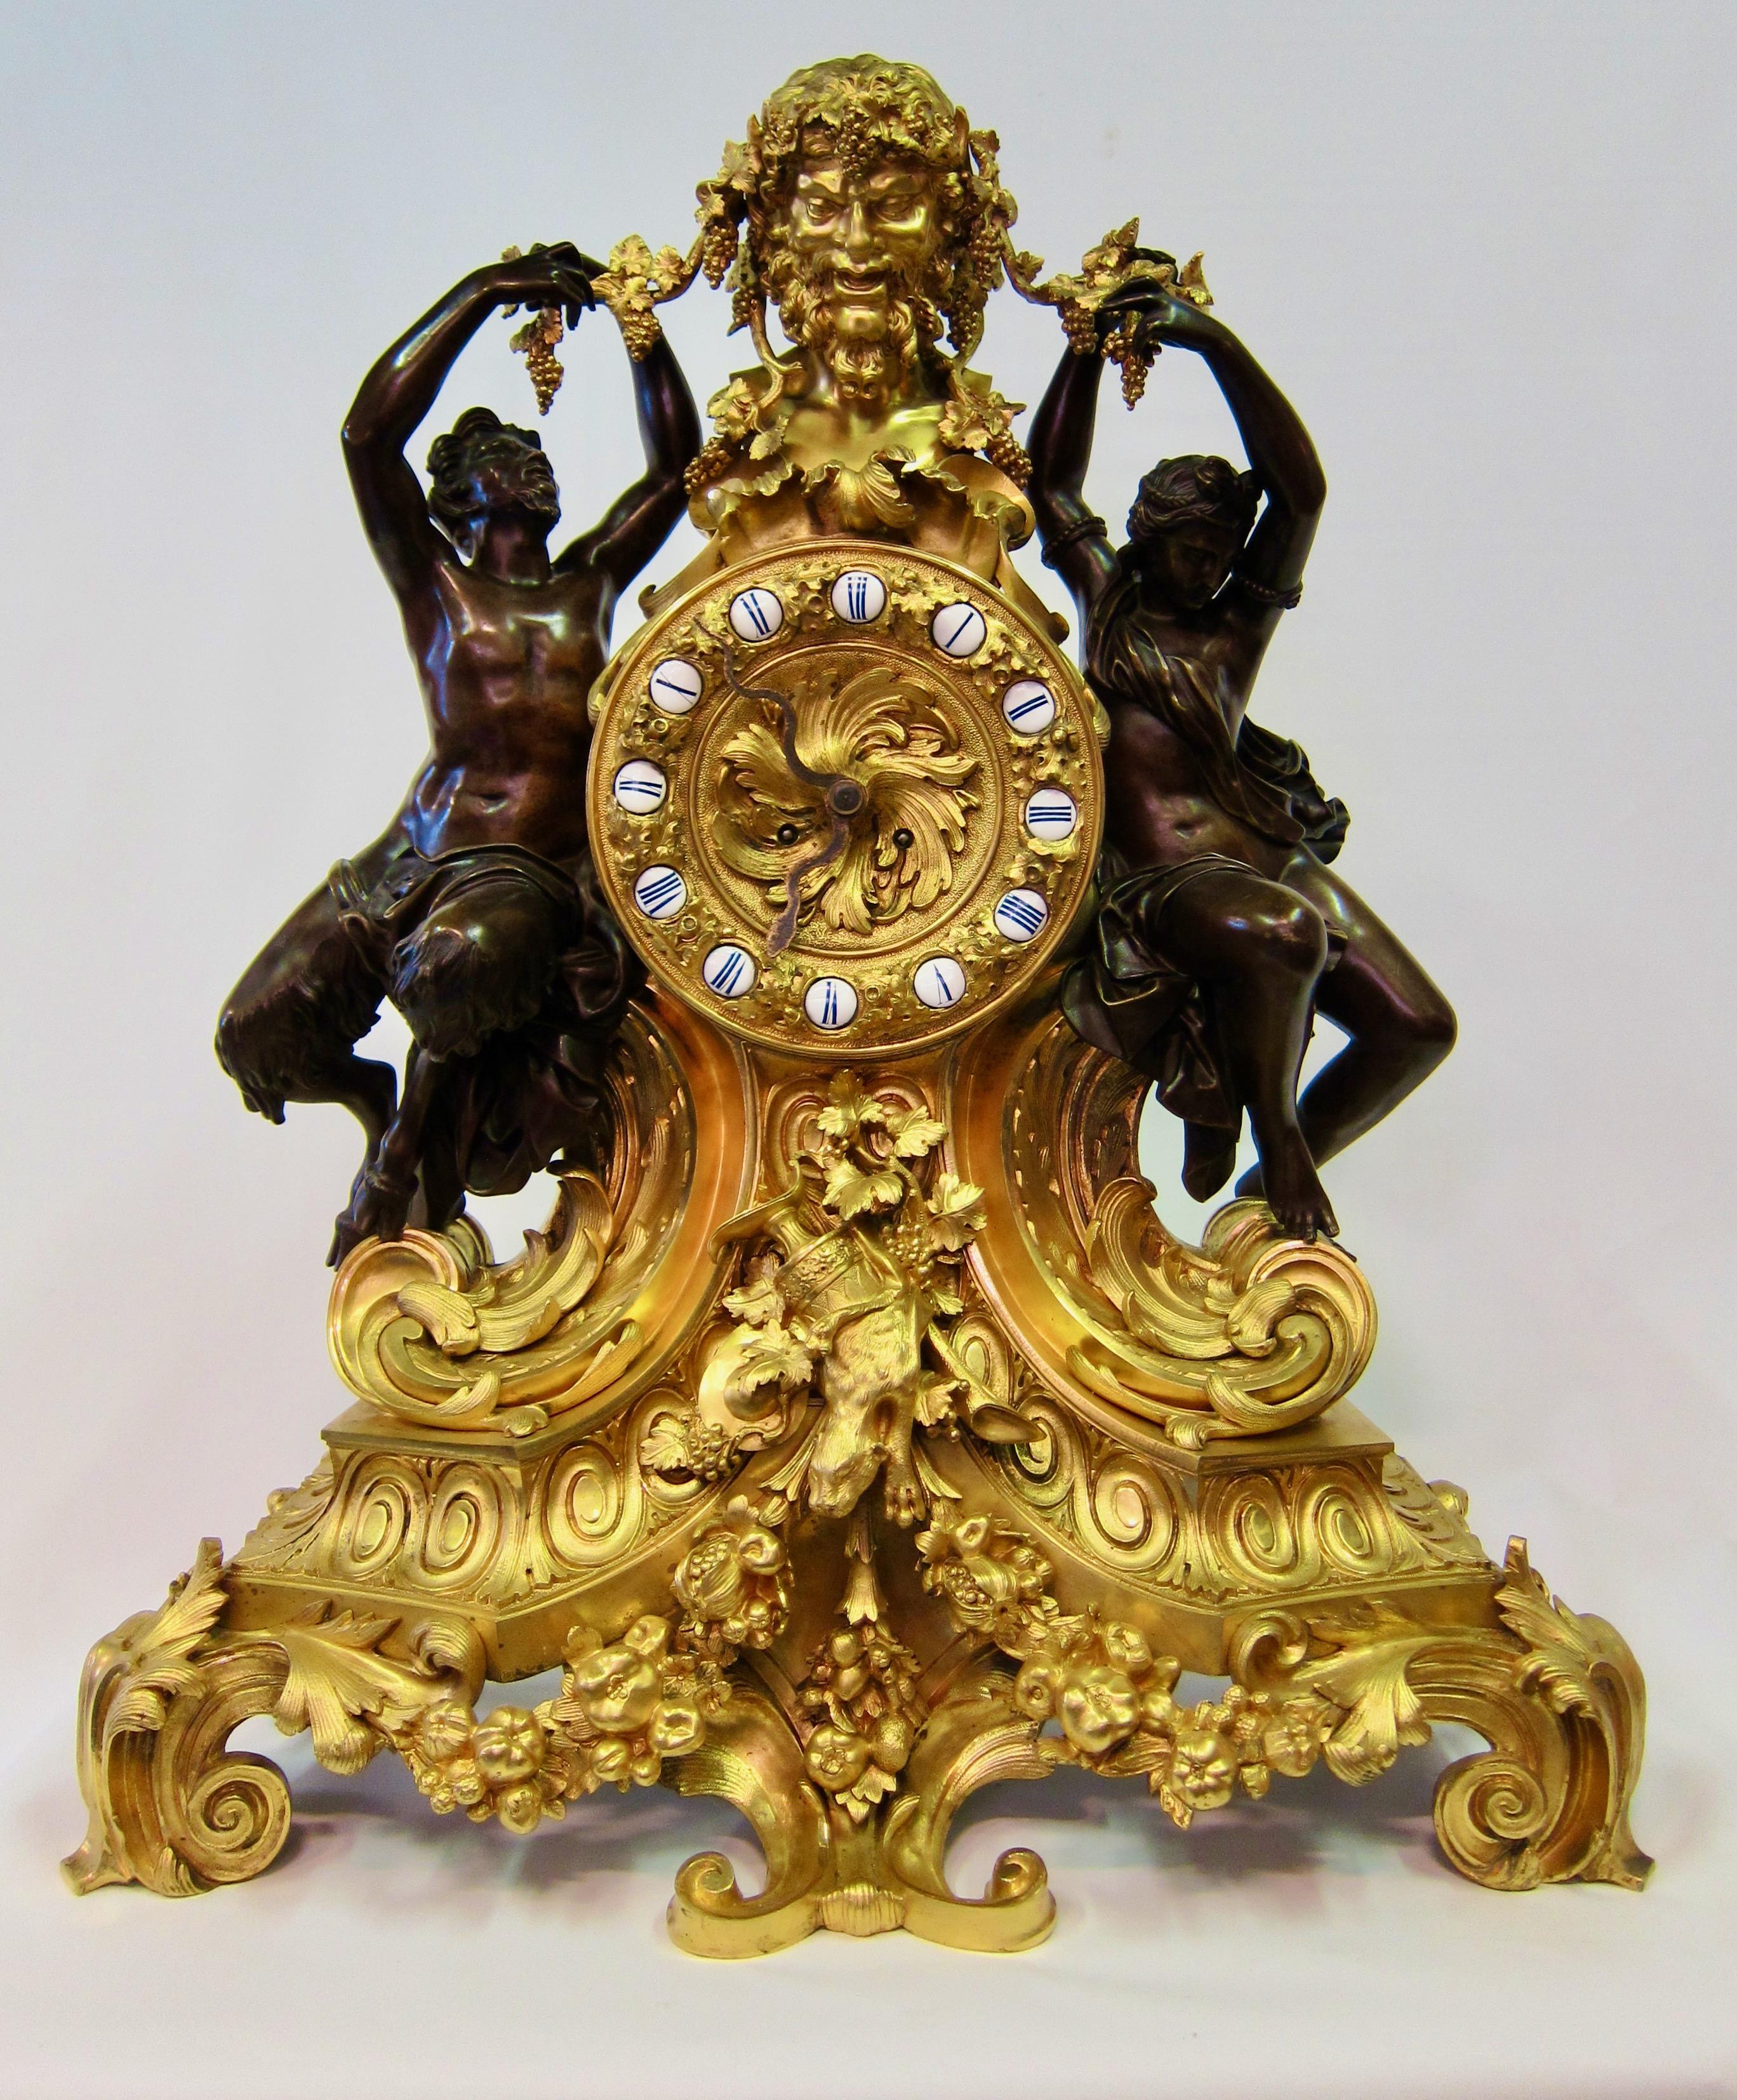 This fabulous Palace clock is designed & executed in Paris, France. The monumental clock is beautifully casted in bronze & retains its original mercury gilding highlighting the dark patinated figures perfectly. This “theme” clock is typical of the